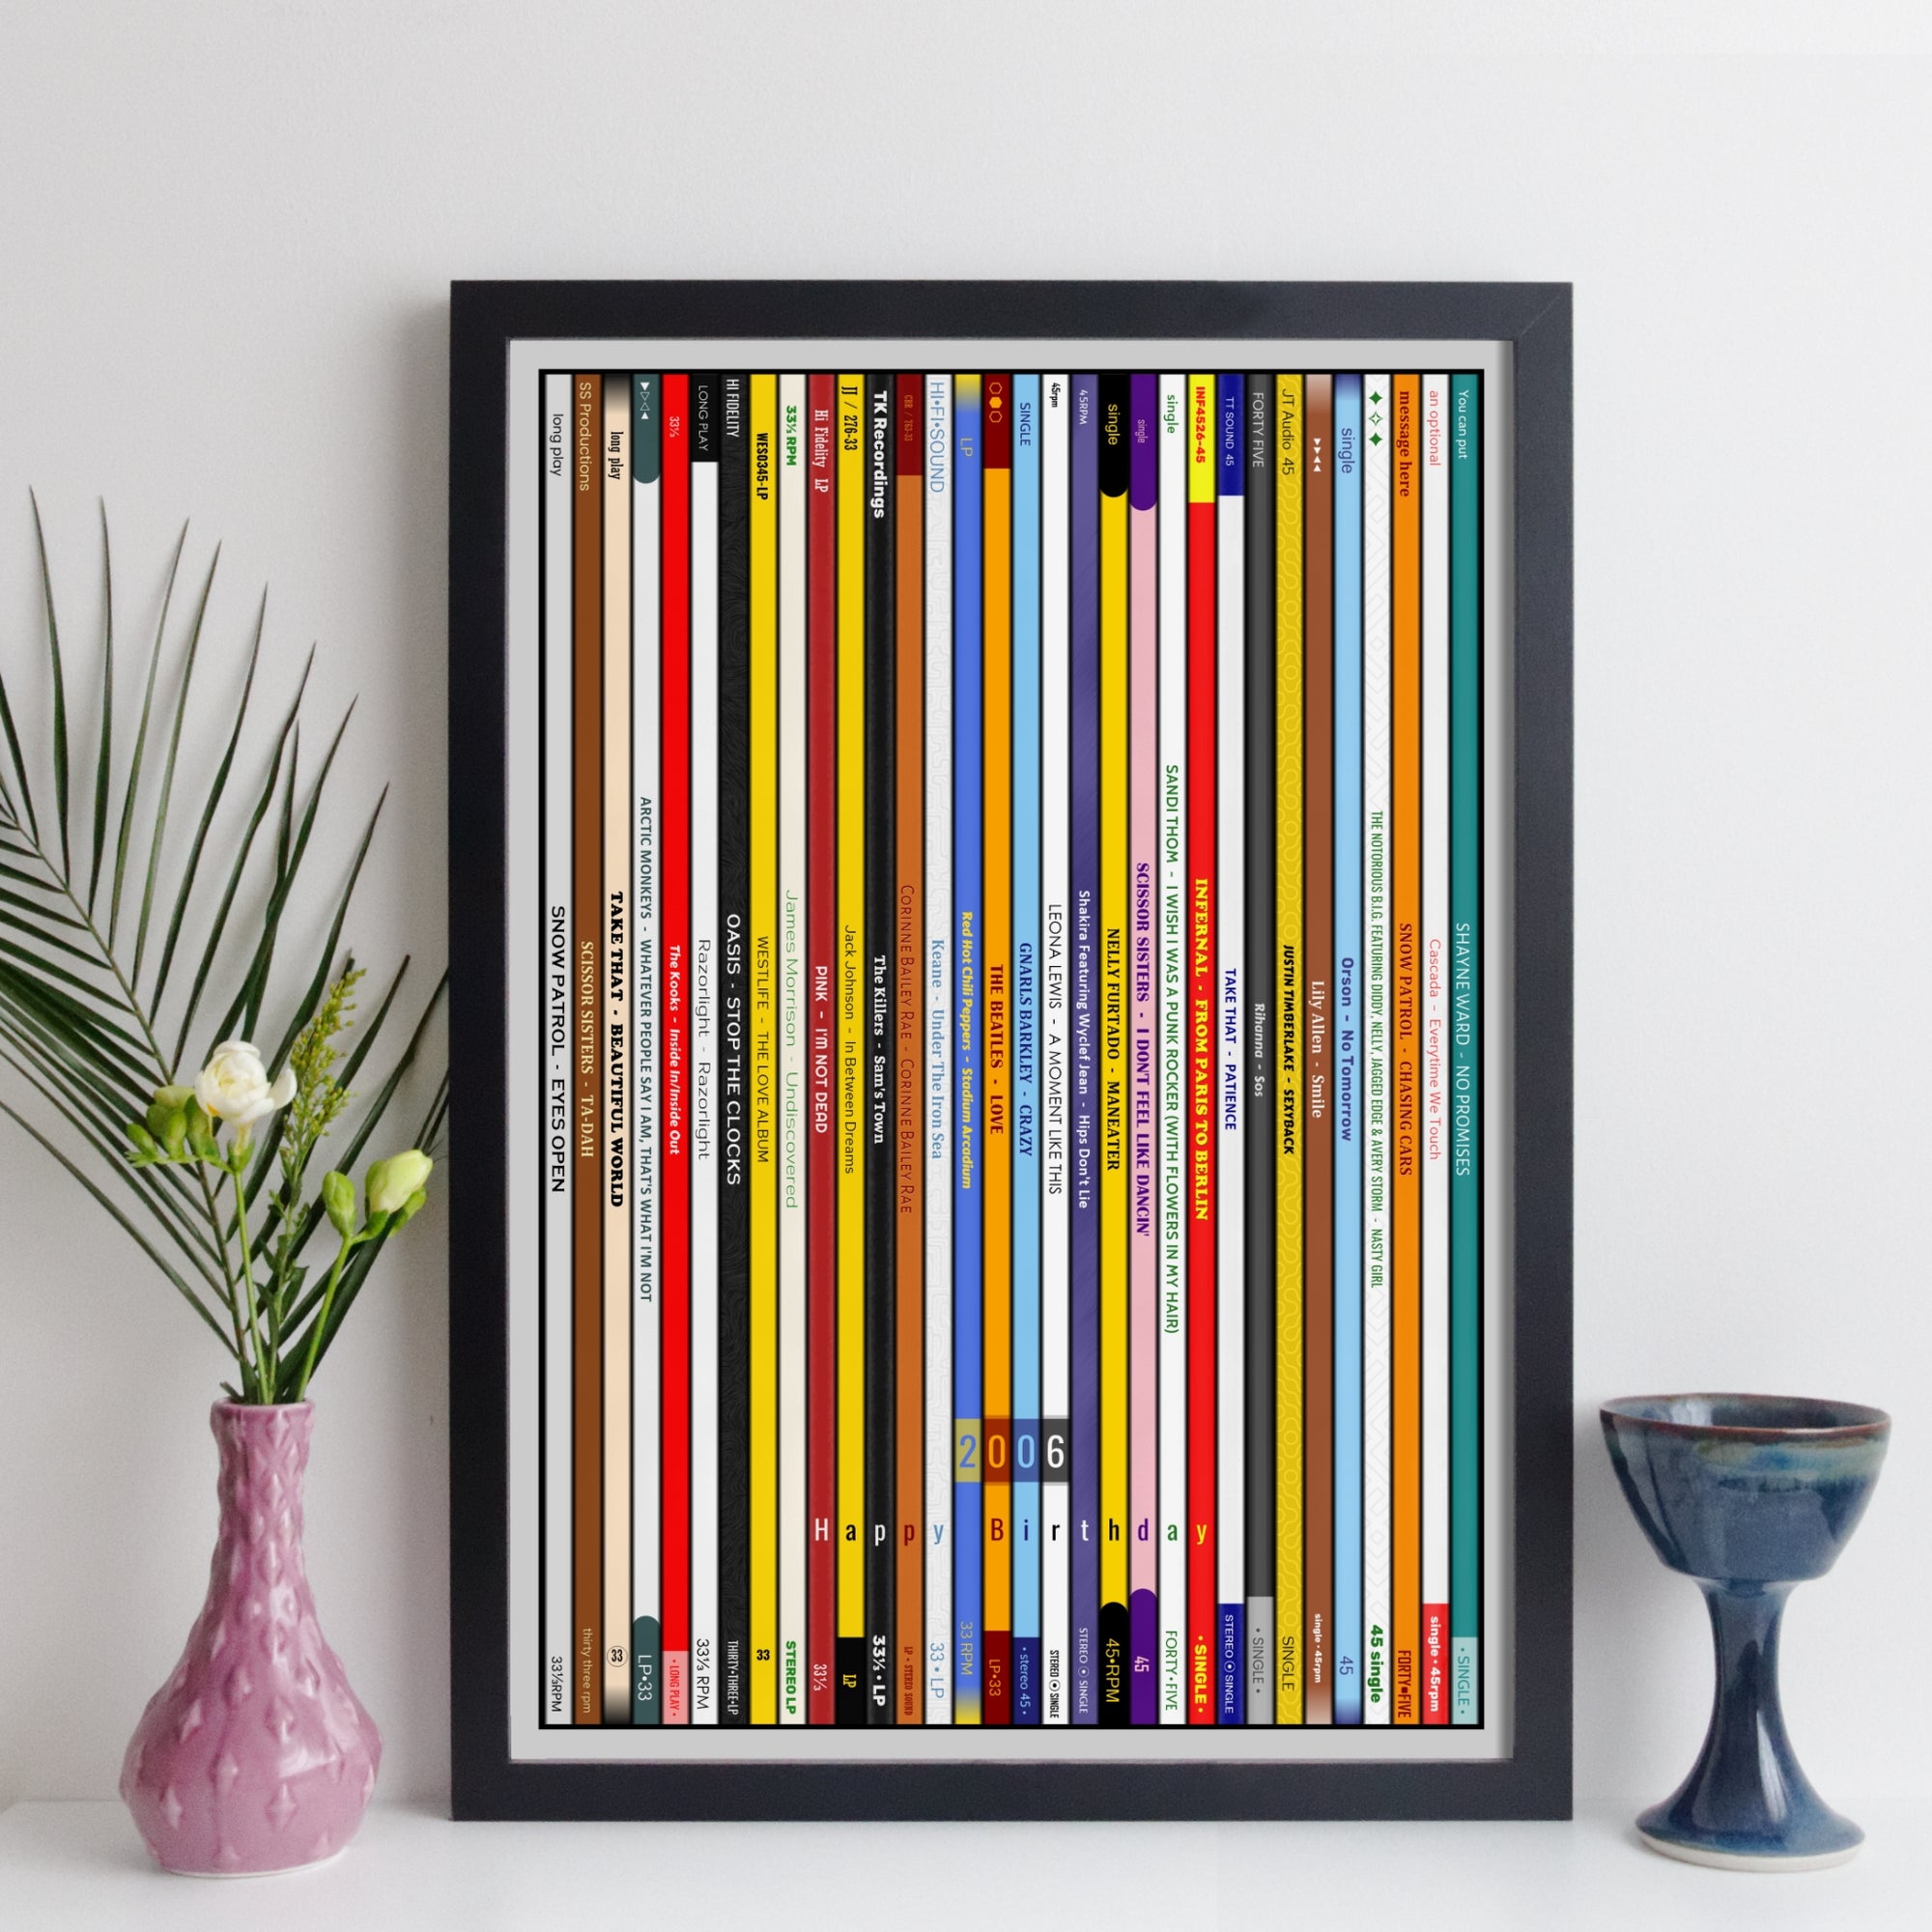 Personalised Music Print - 2006 UK Record Collection Print - birthday gift idea